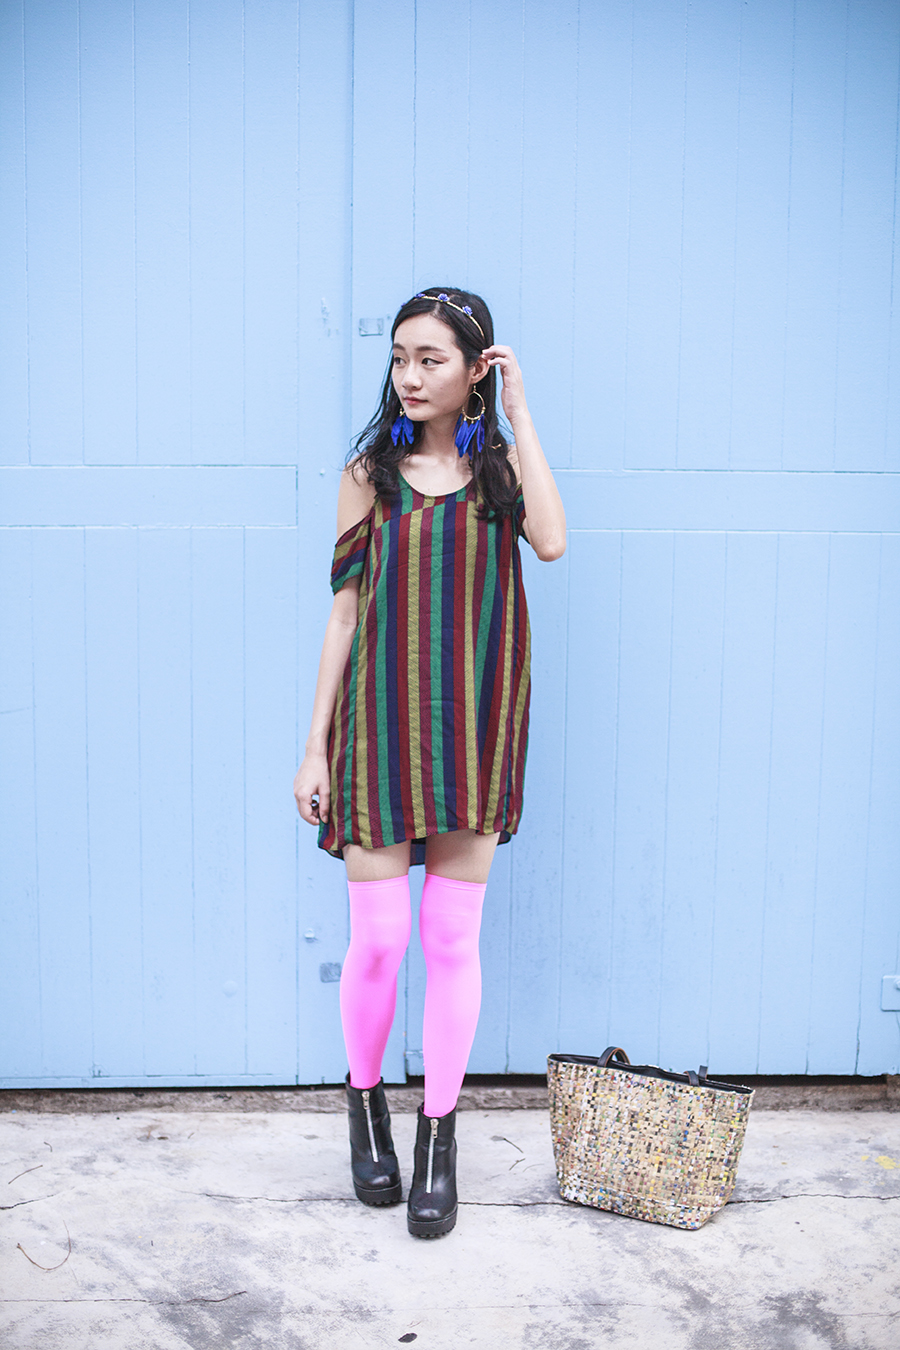 Bohemian Rhapsody Outfit: Urban Outfitters striped off-shoulder dress, We Love Colors neon pink thigh high stockings, Rubi black platform zipper boots, paper floral headband from Bangkok, H&M blue feather hoop earrings, manga strips tote bag from Hong Kong.